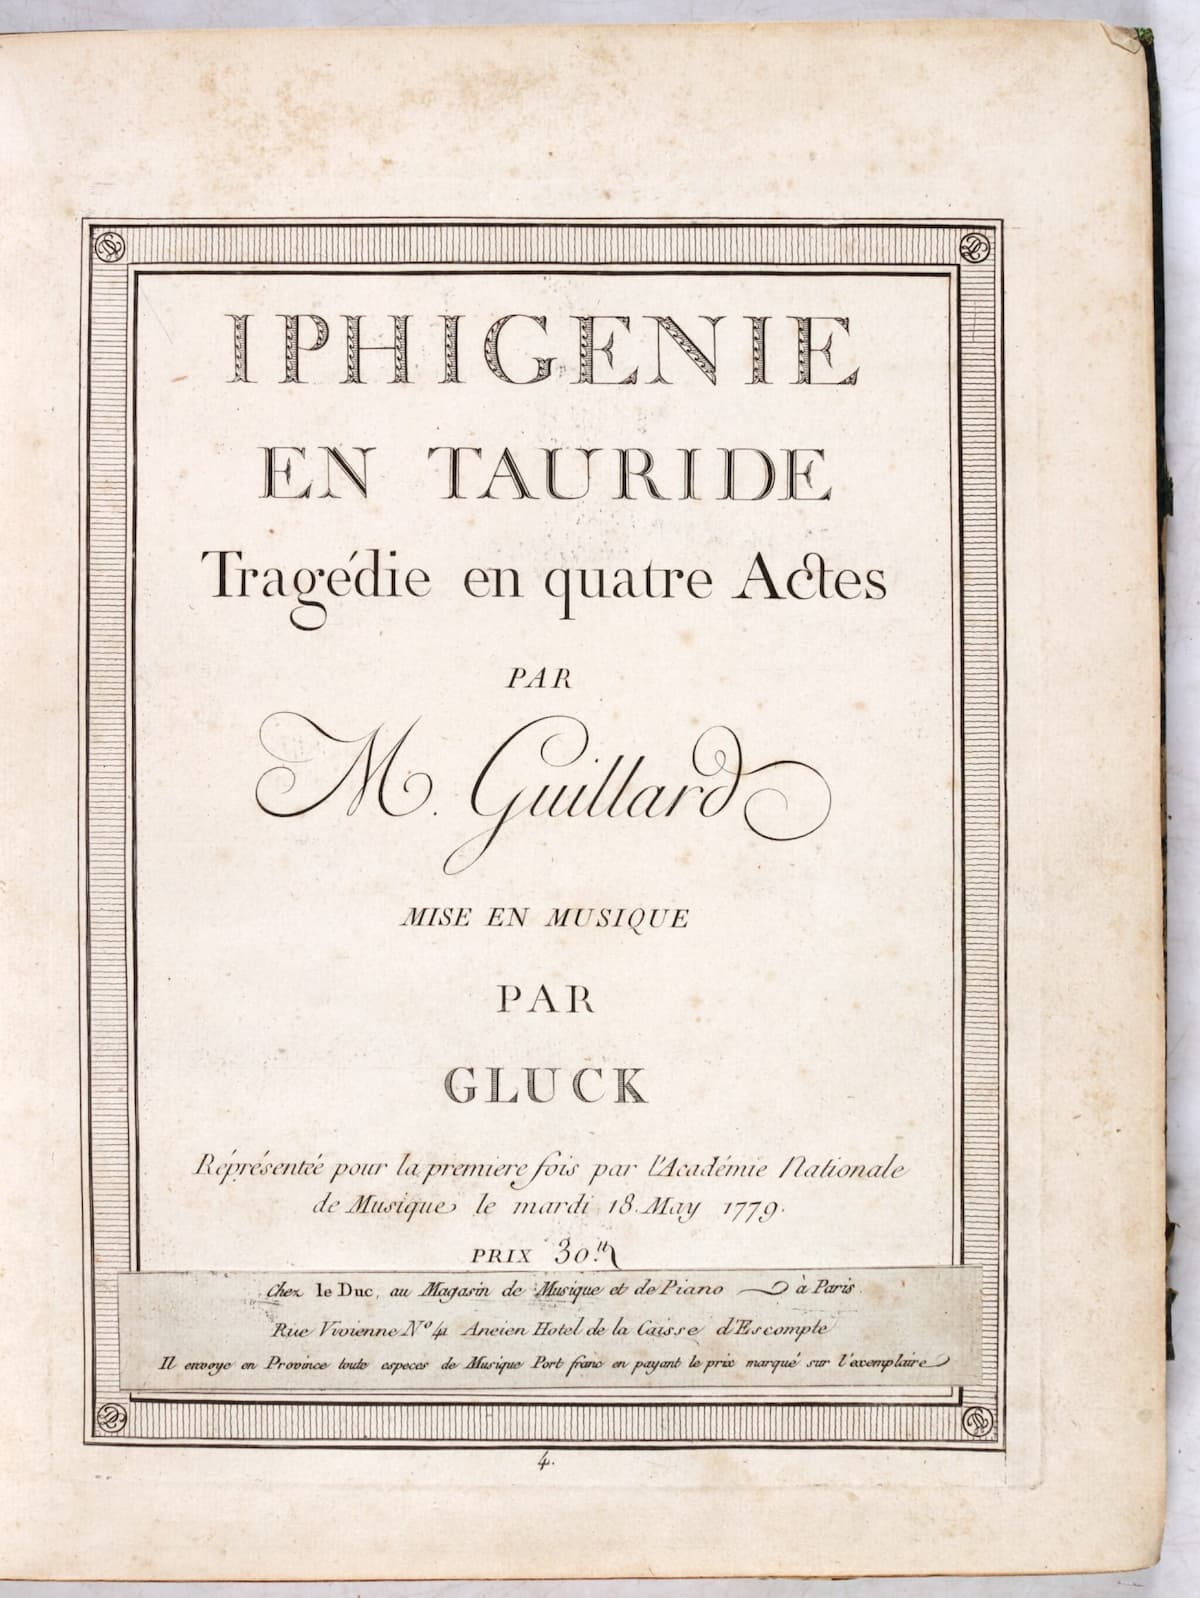 Title page of the first printed edition of the score of Gluck’s Iphigénie en Tauride